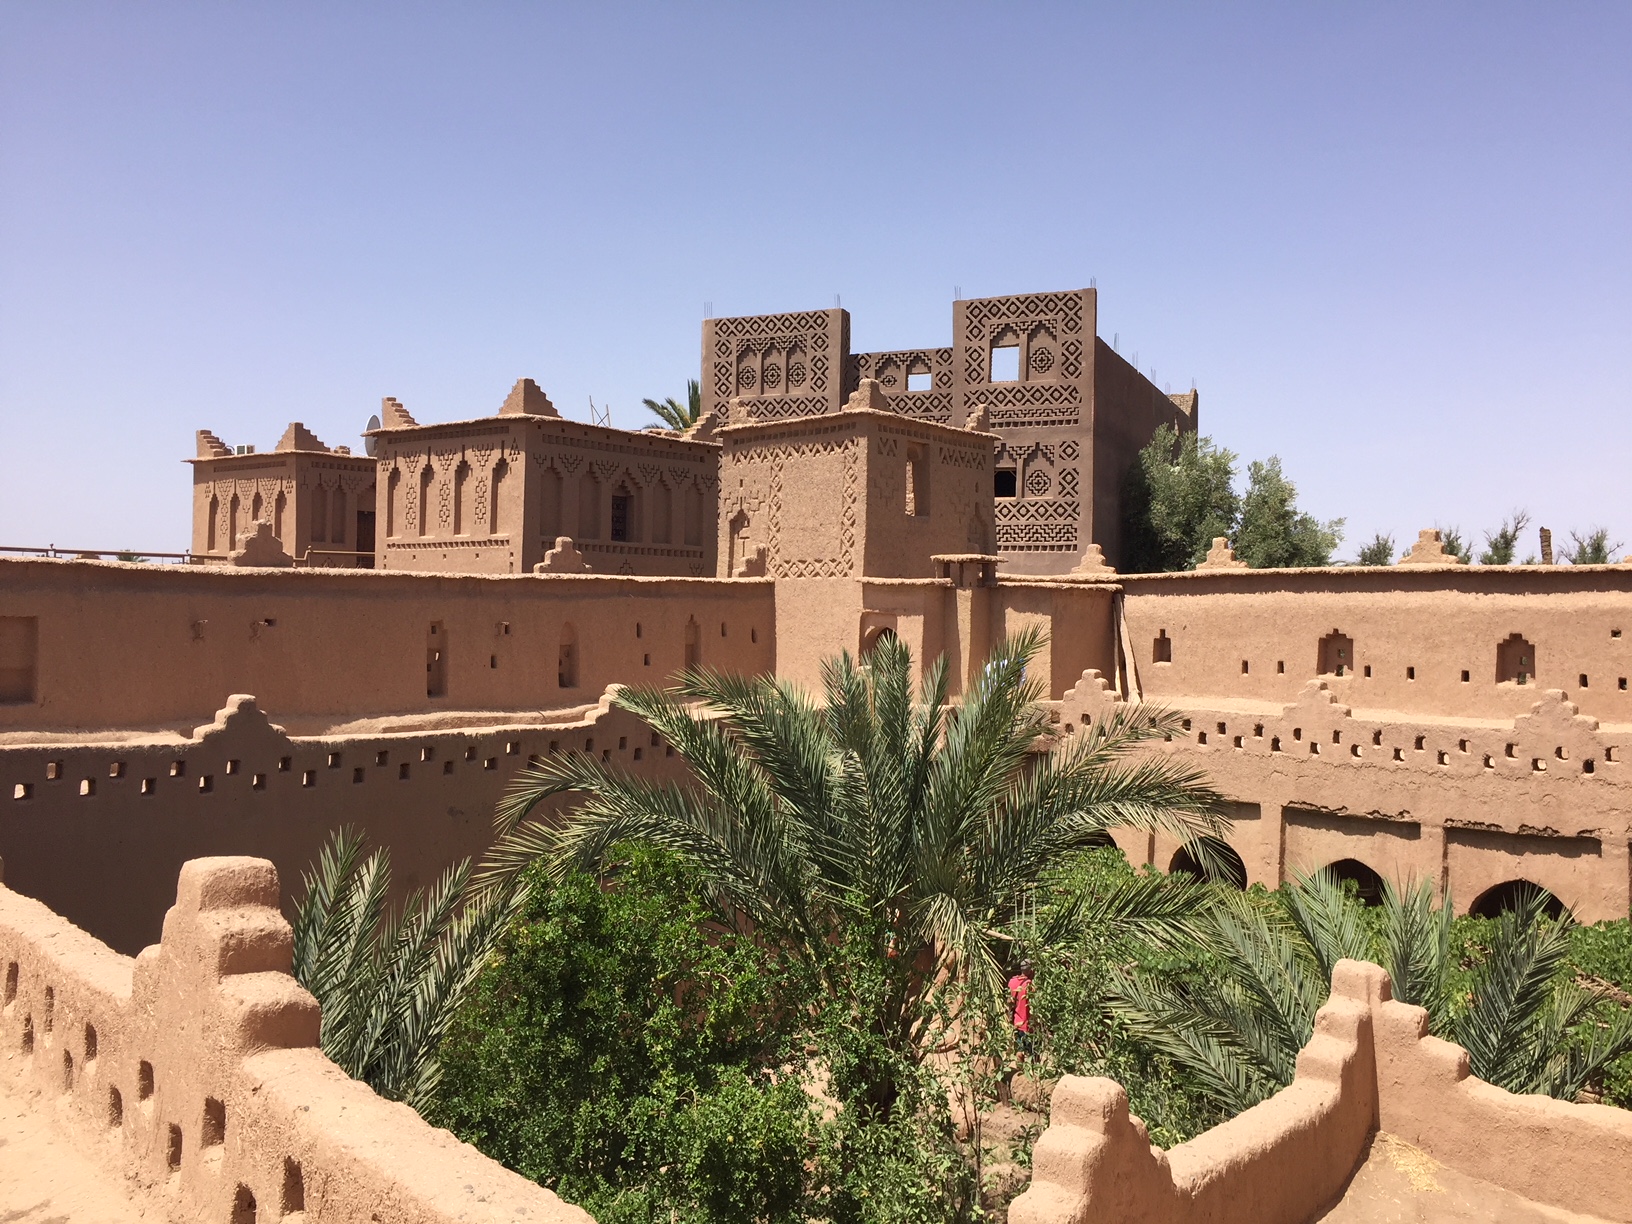 Flights to Morocco in the $500s round-trip